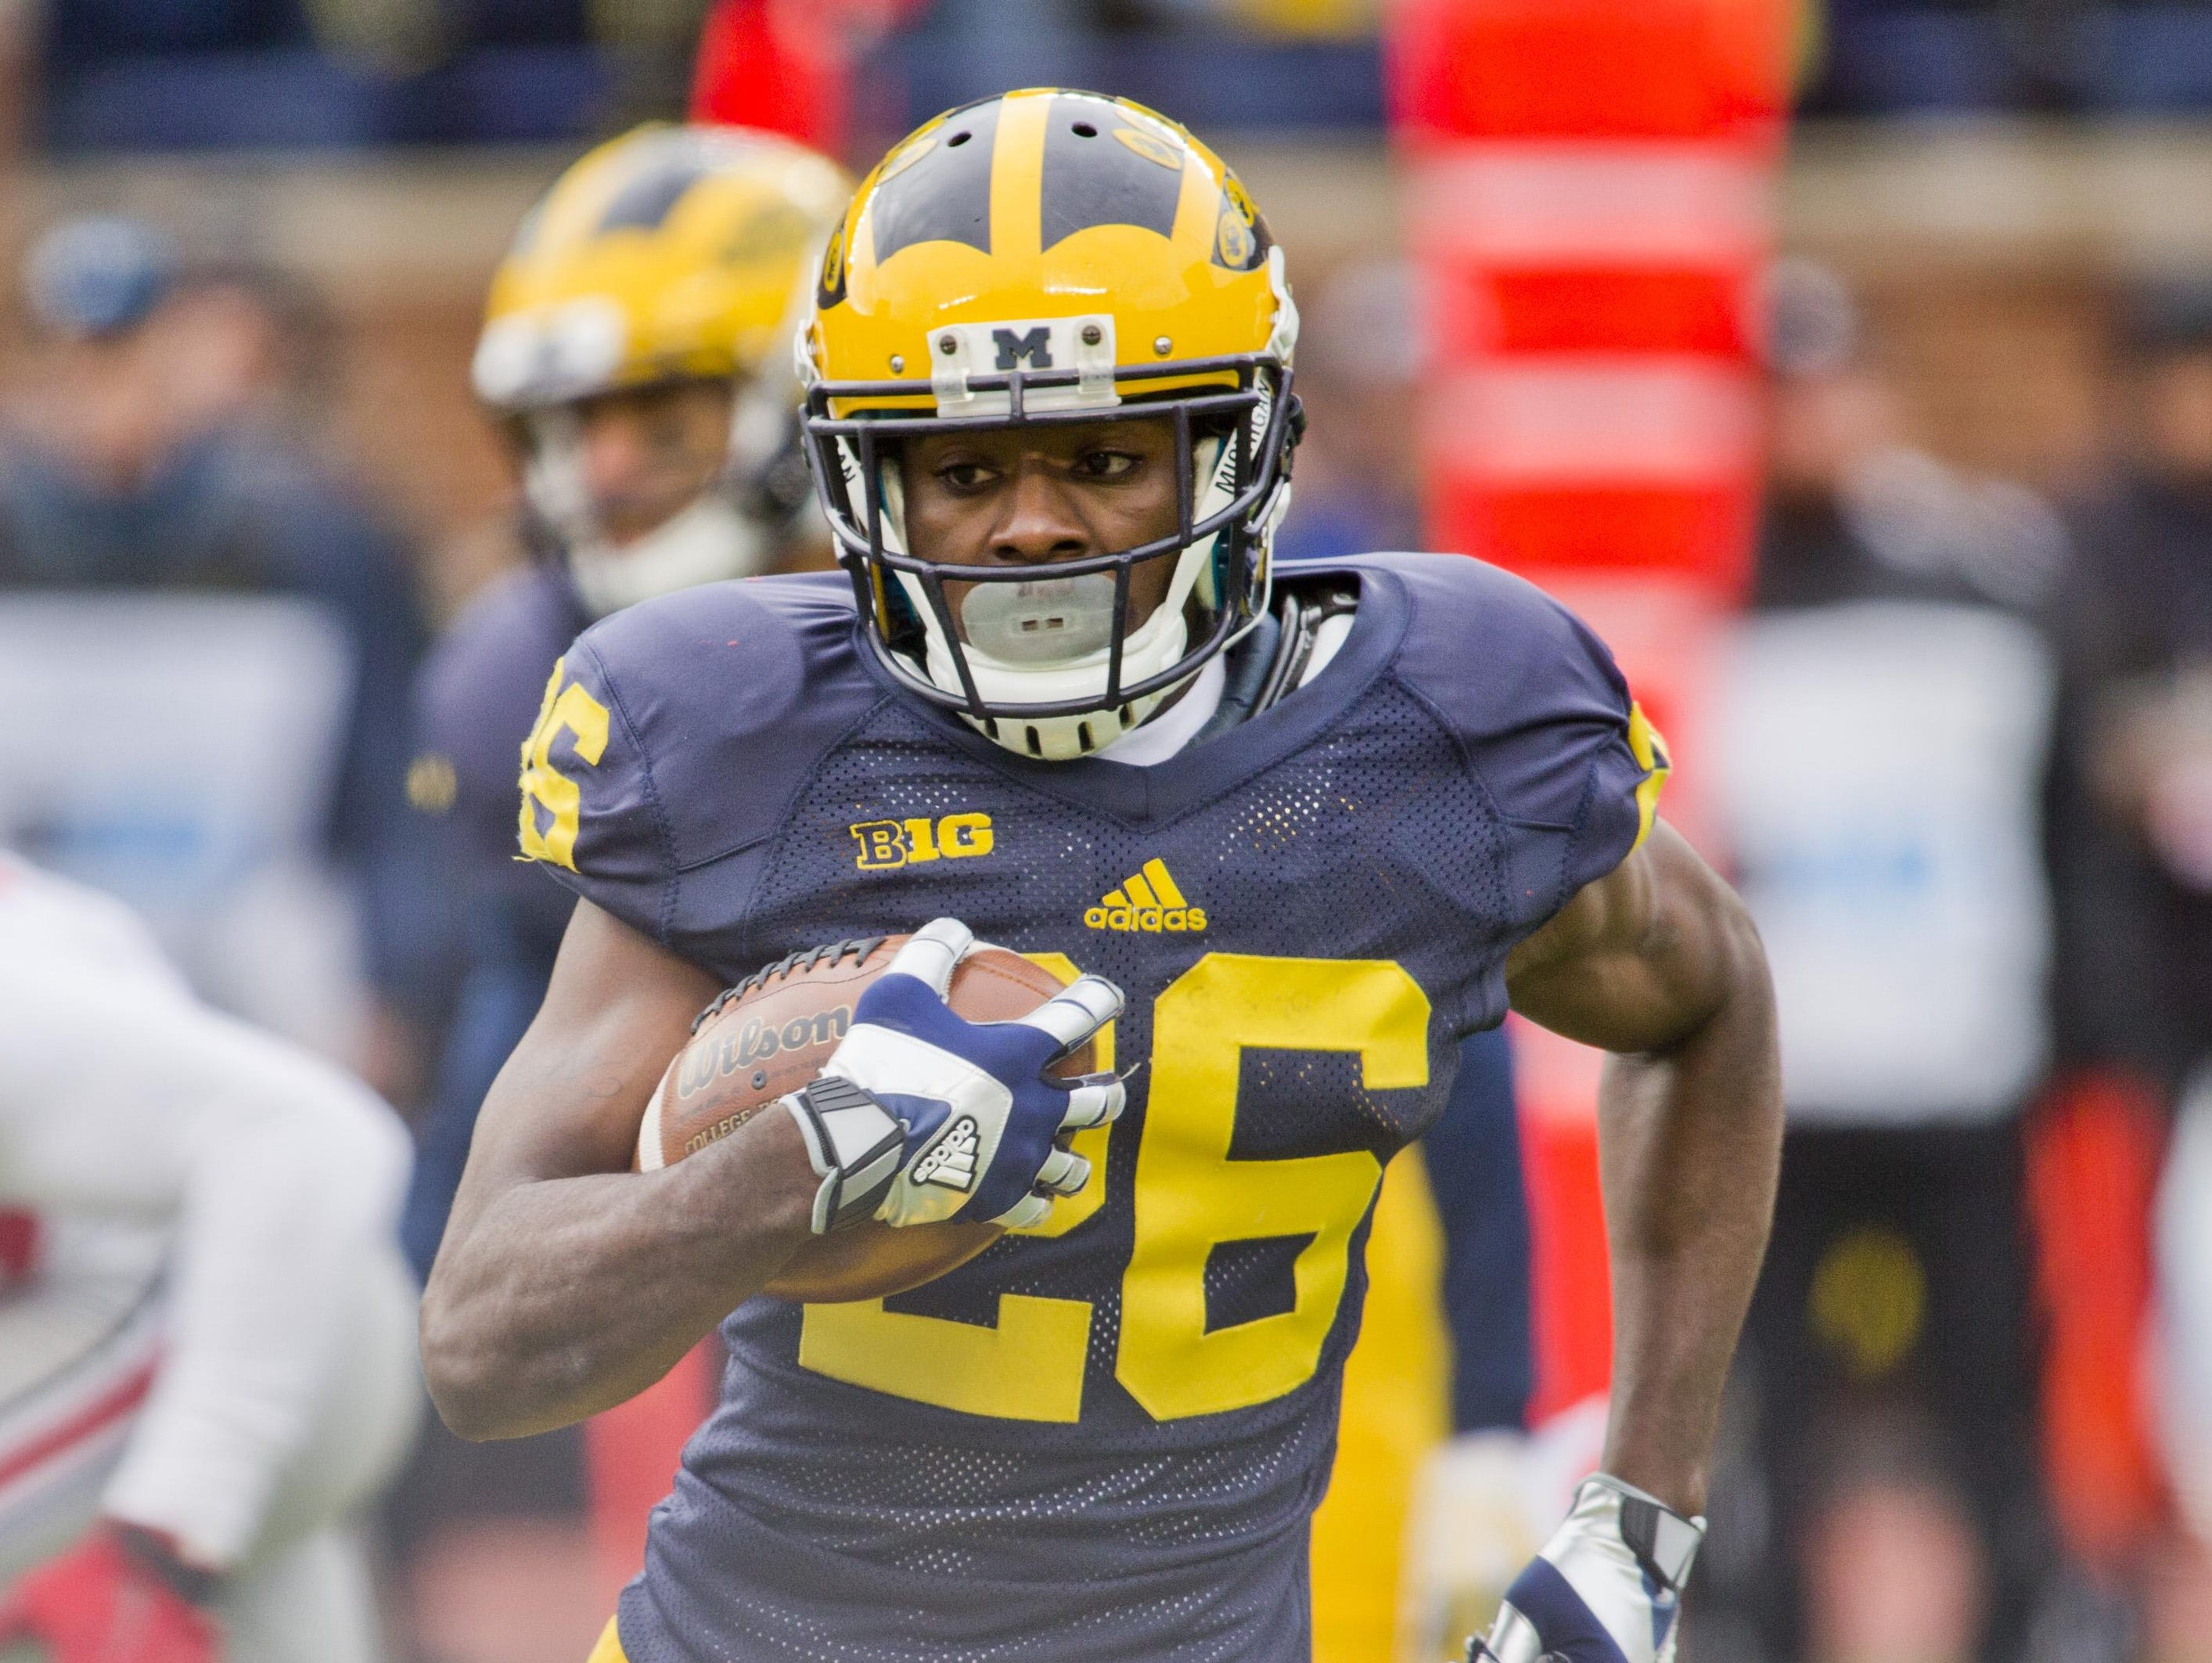 U-M defensive back Jourdan Lewis is rated among the best in the U.S.